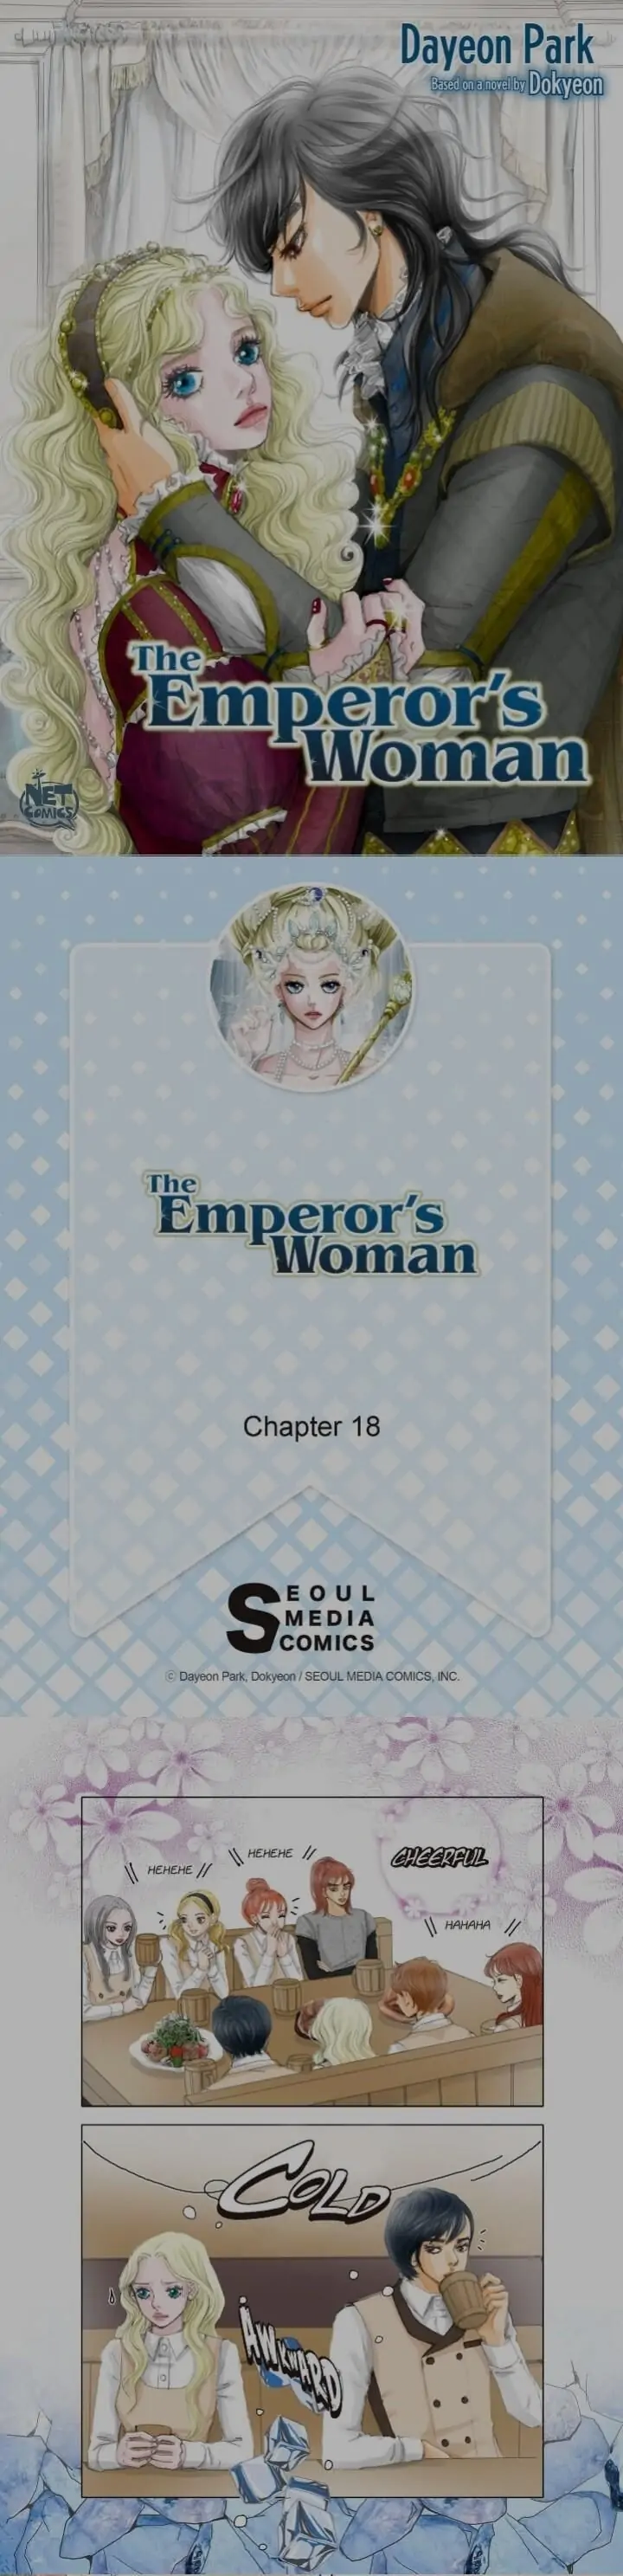 The Emperor’s Woman chapter 18